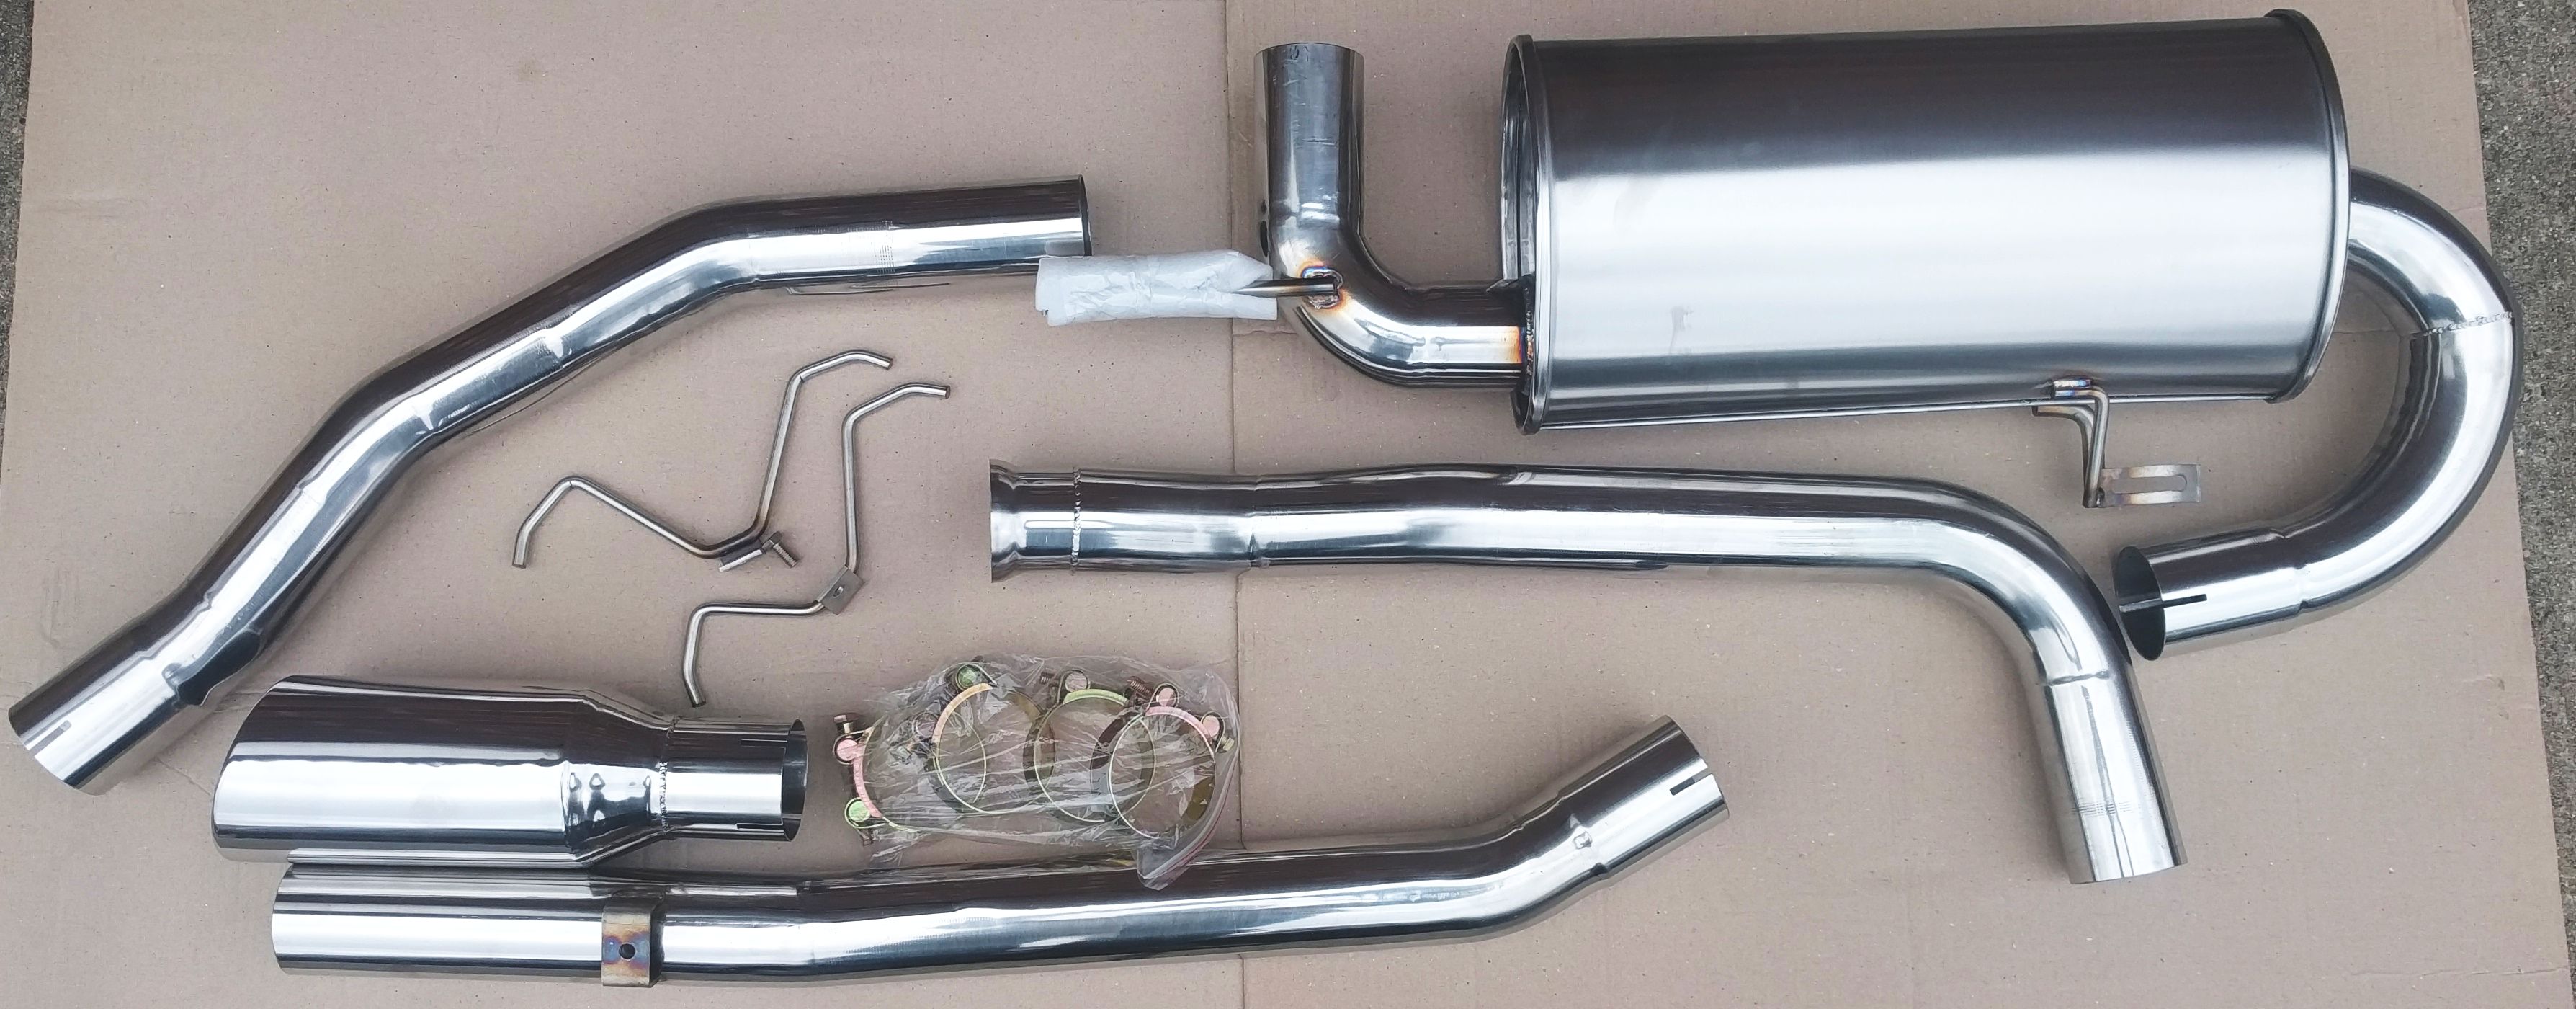 VOLVO 850 Stainless Steel Exhaust System 2.5" Pipe Custom Tuned NEW!